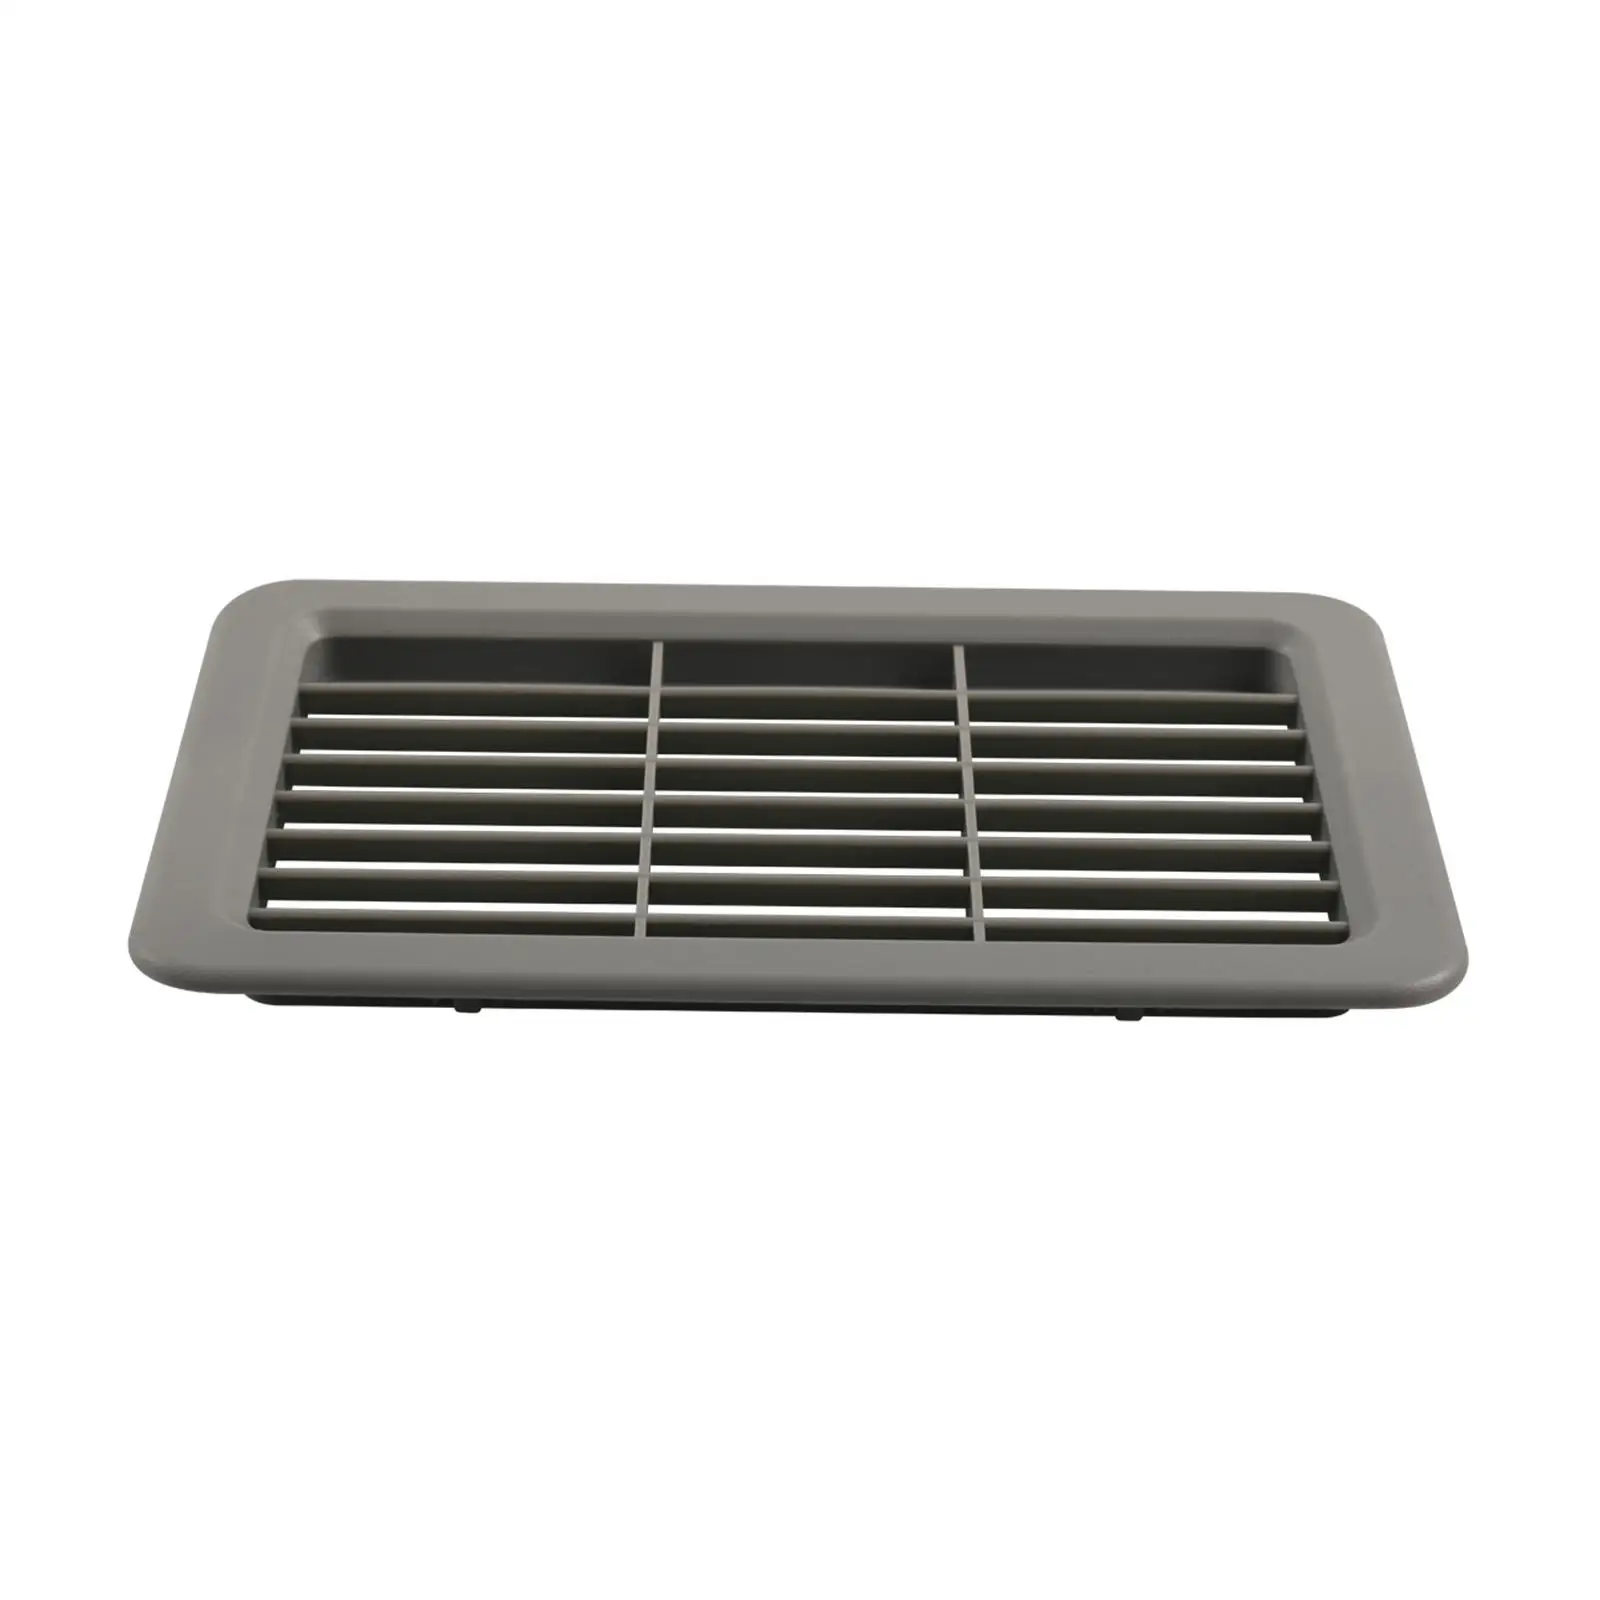 Air Vent Grille Supply Black Durable Easily Install High Performance Direct Replaces for RV Truck Camping Traveling Trailer